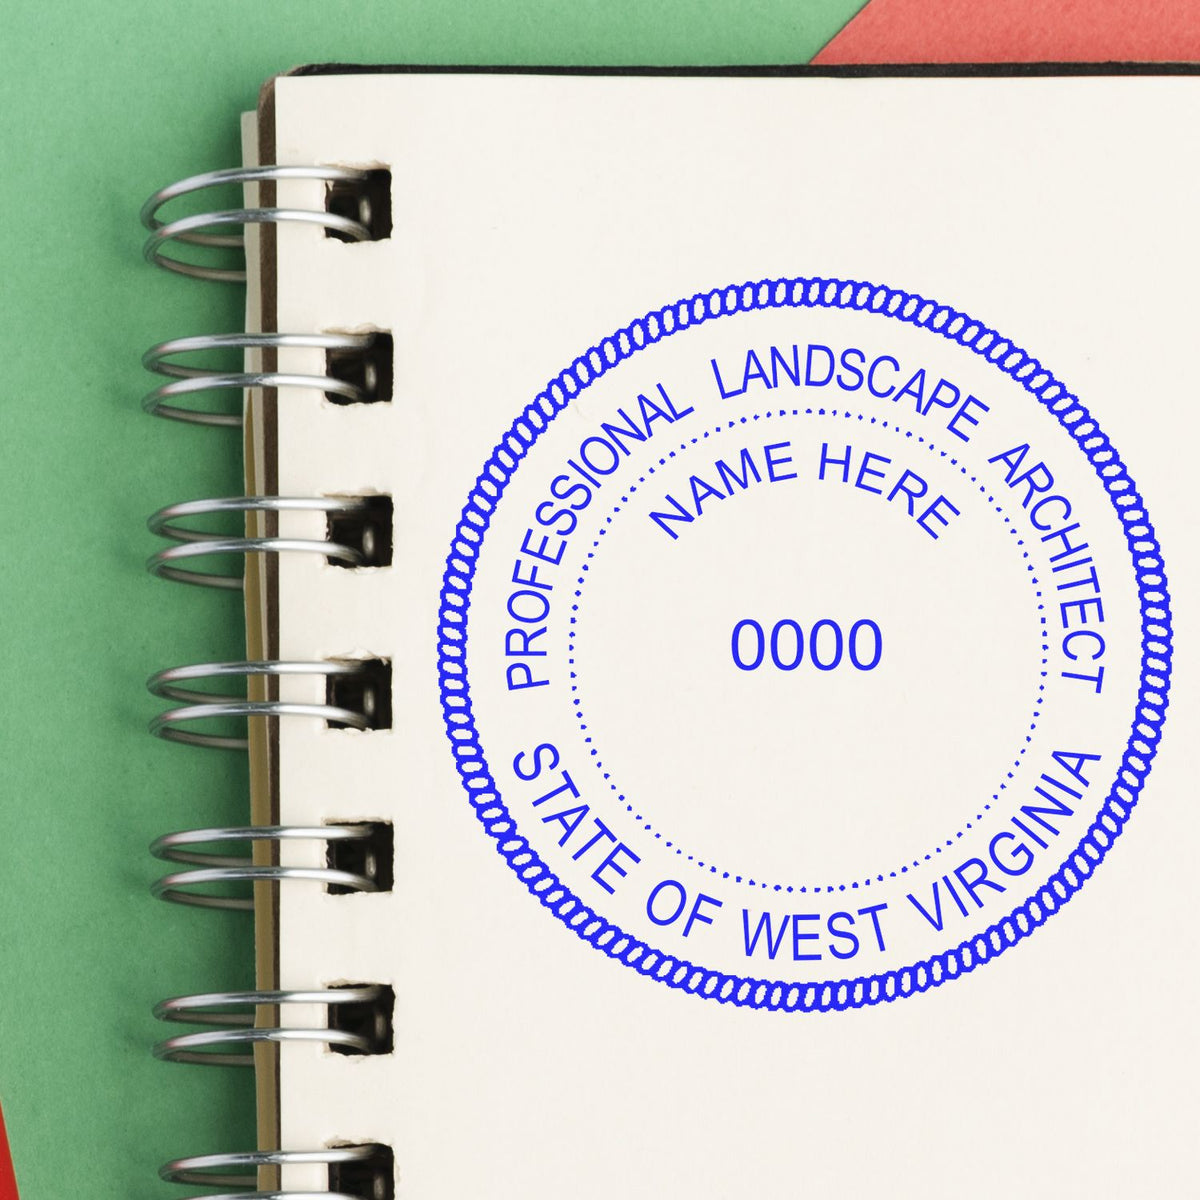 The Digital West Virginia Landscape Architect Stamp stamp impression comes to life with a crisp, detailed photo on paper - showcasing true professional quality.